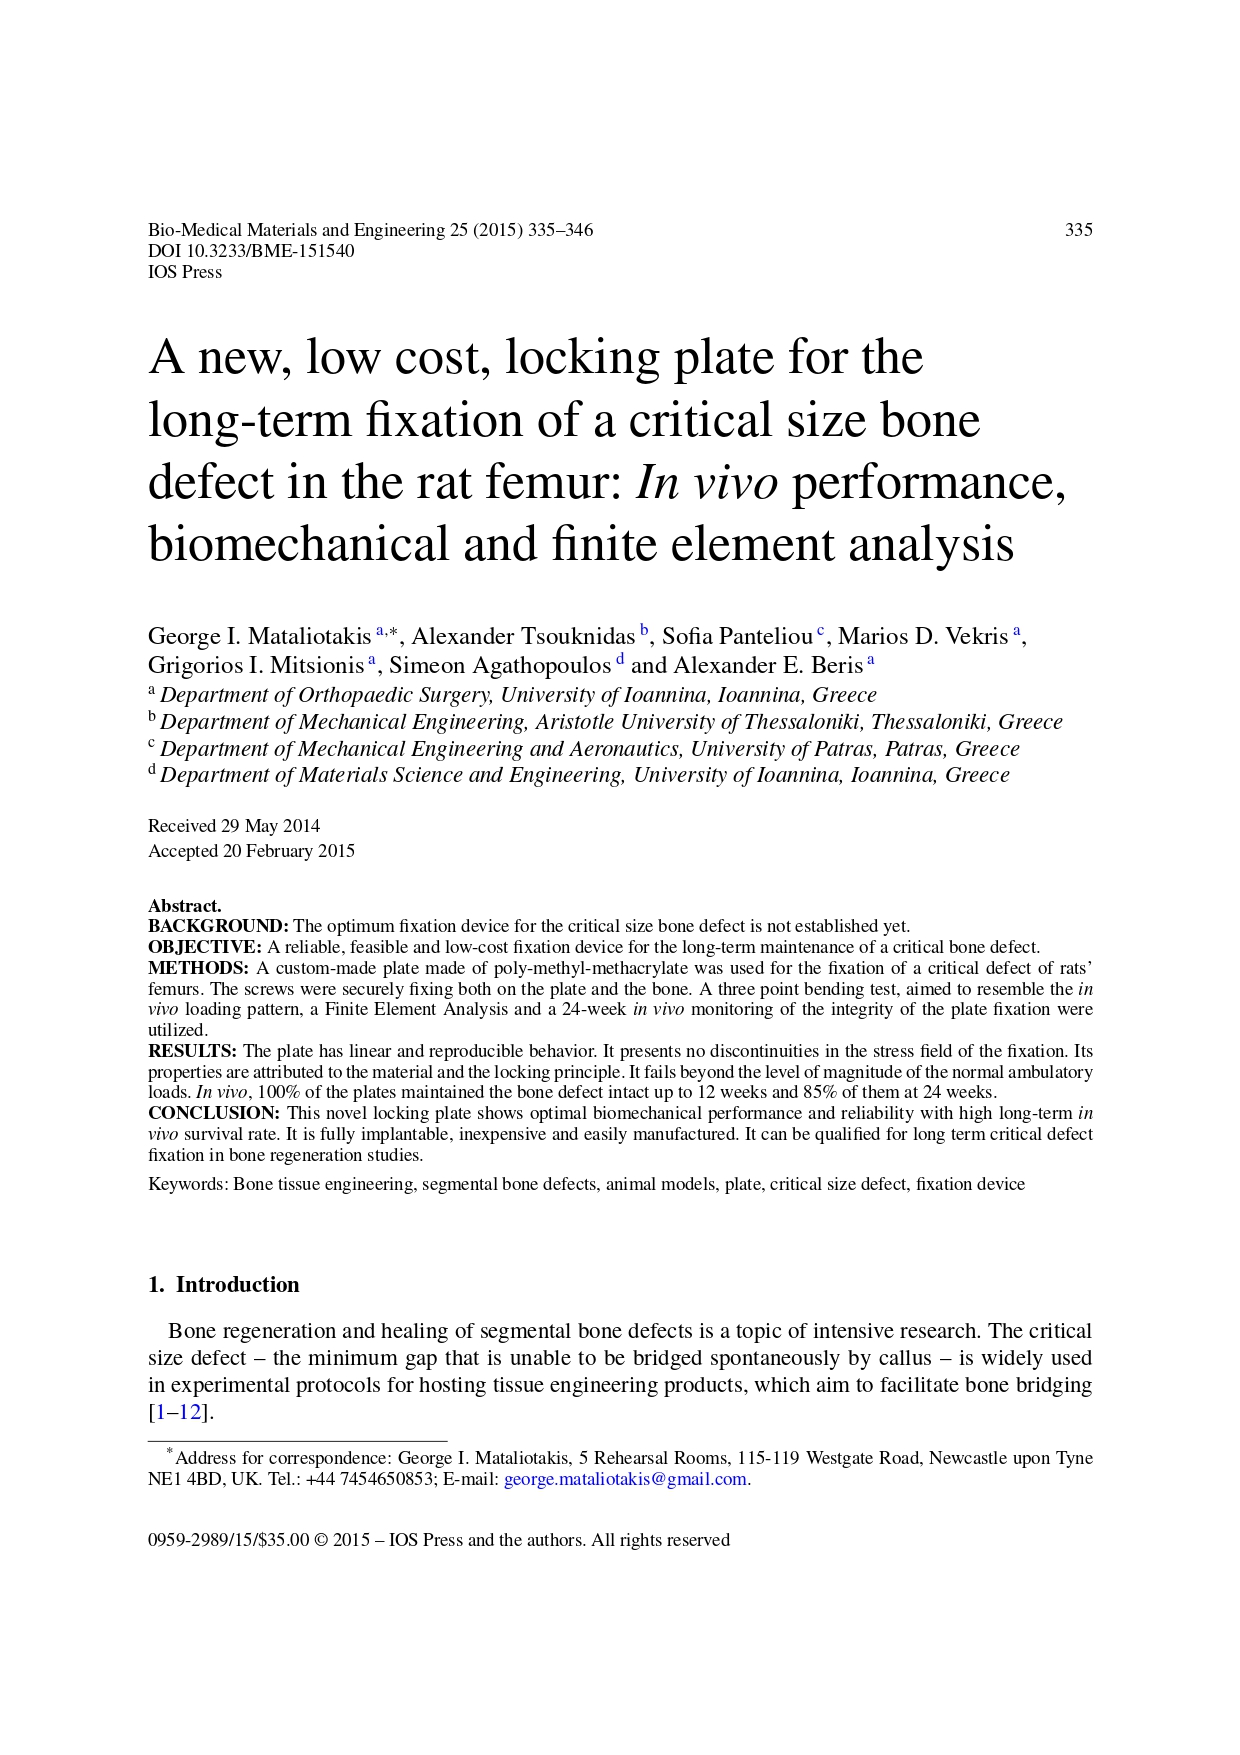 A new, low cost, locking plate for the long-term fixation of a critical size bone defect in the ratfemur In vivo performance, biomechanical and finite element analysis_page-0001.jpg